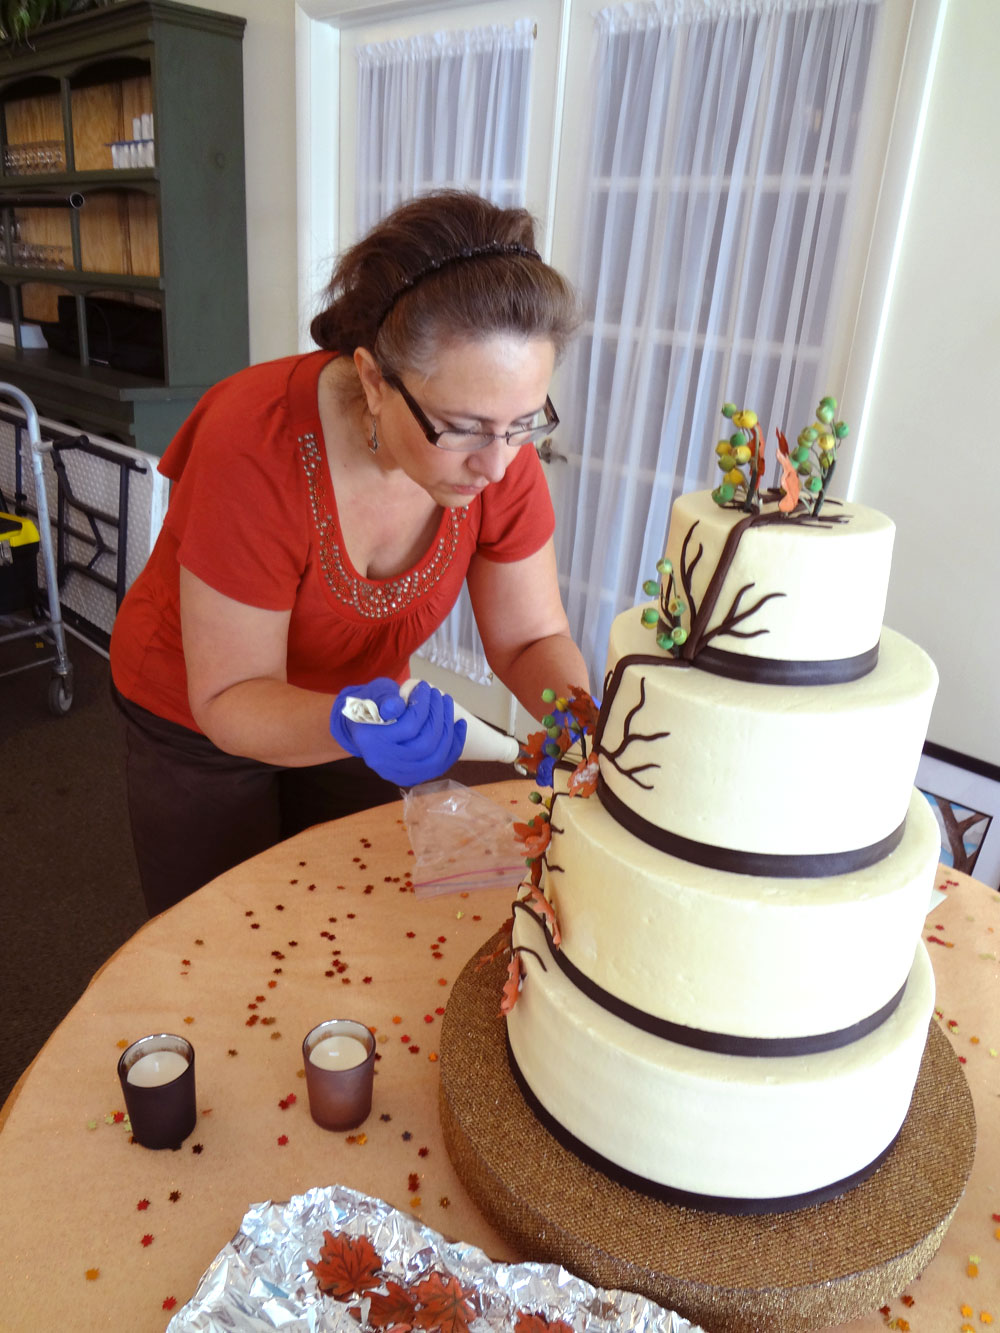 About – Custom Cakes by Ann Marie